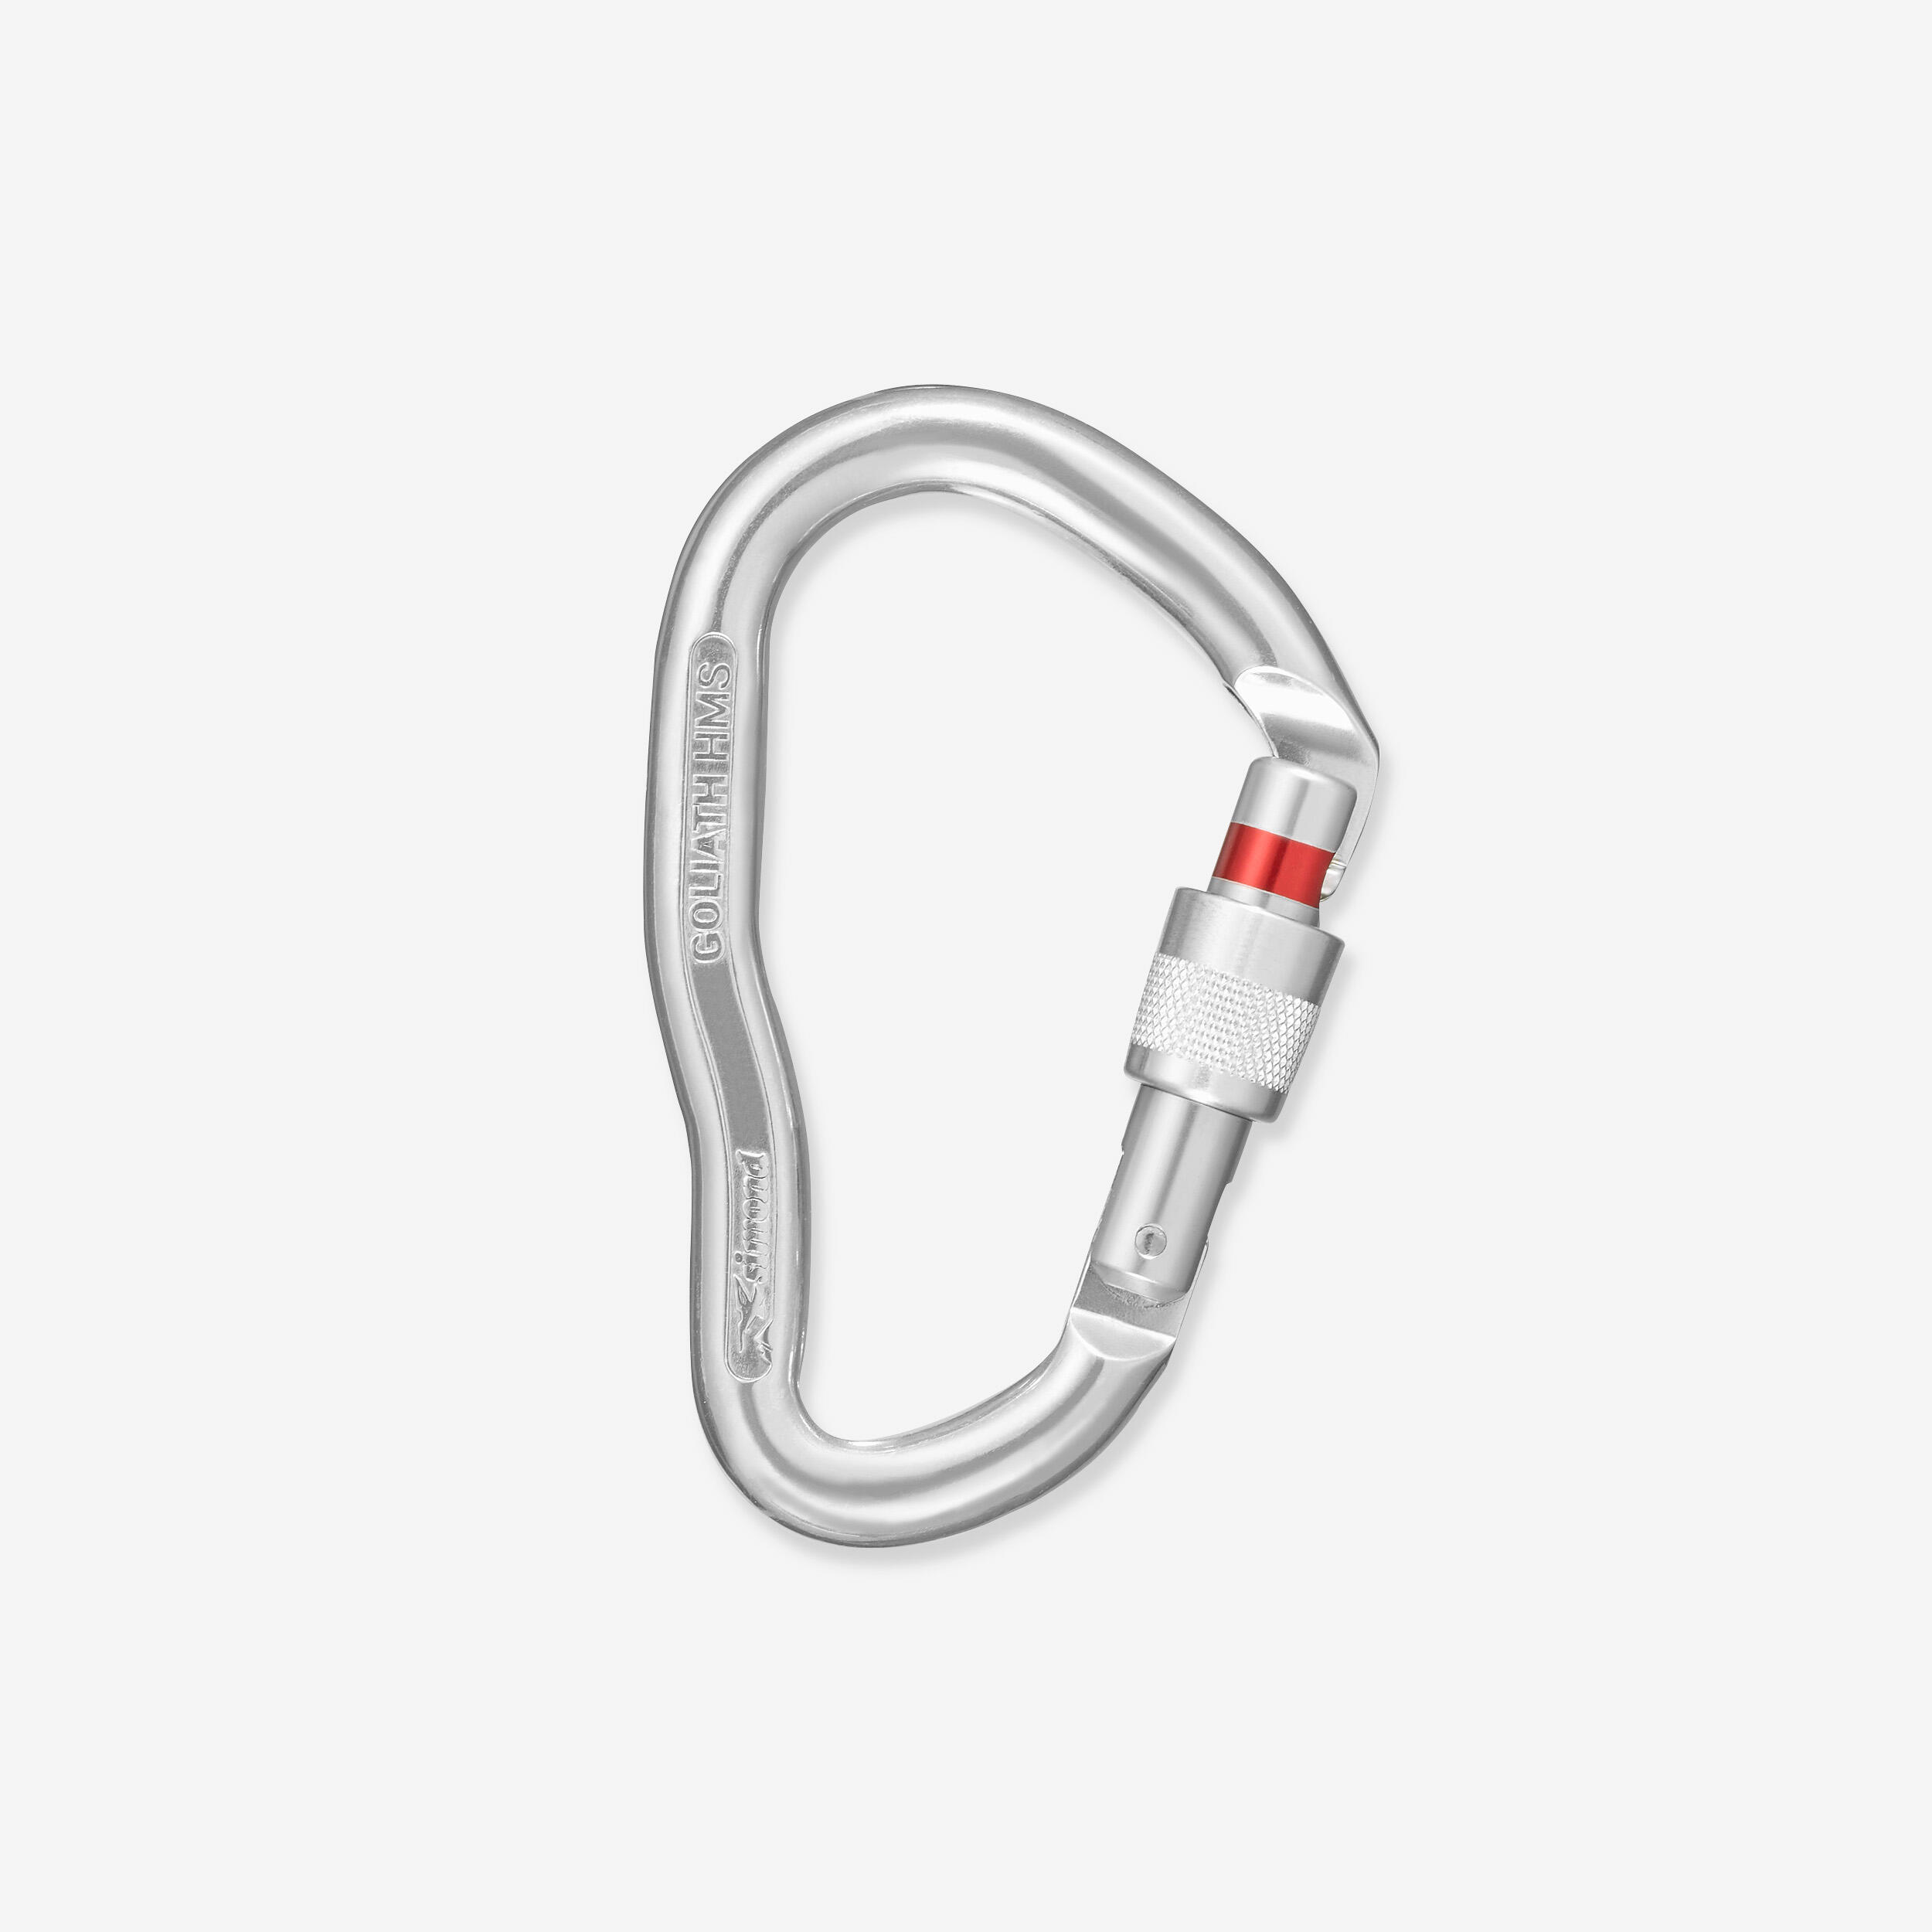 HMS MOUNTAINEERING AND CLIMBING SCREWGATE CARABINER - GOLIATH SECURE GREY 1/4